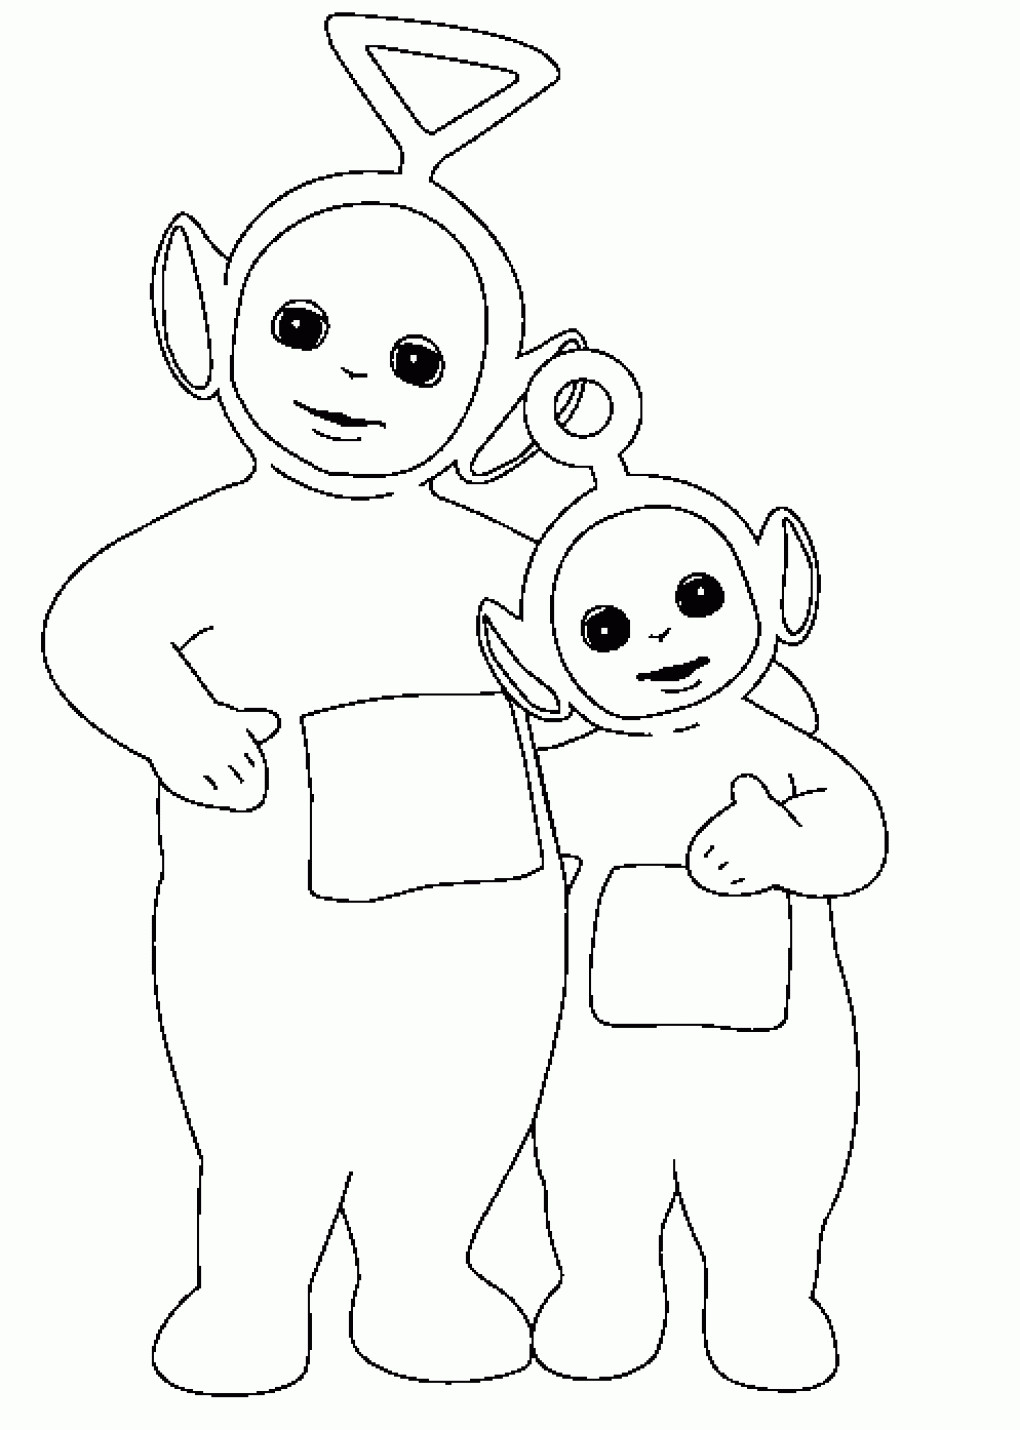 Free Printable Coloring Pages For Toddlers
 Free Printable Teletubbies Coloring Pages For Kids